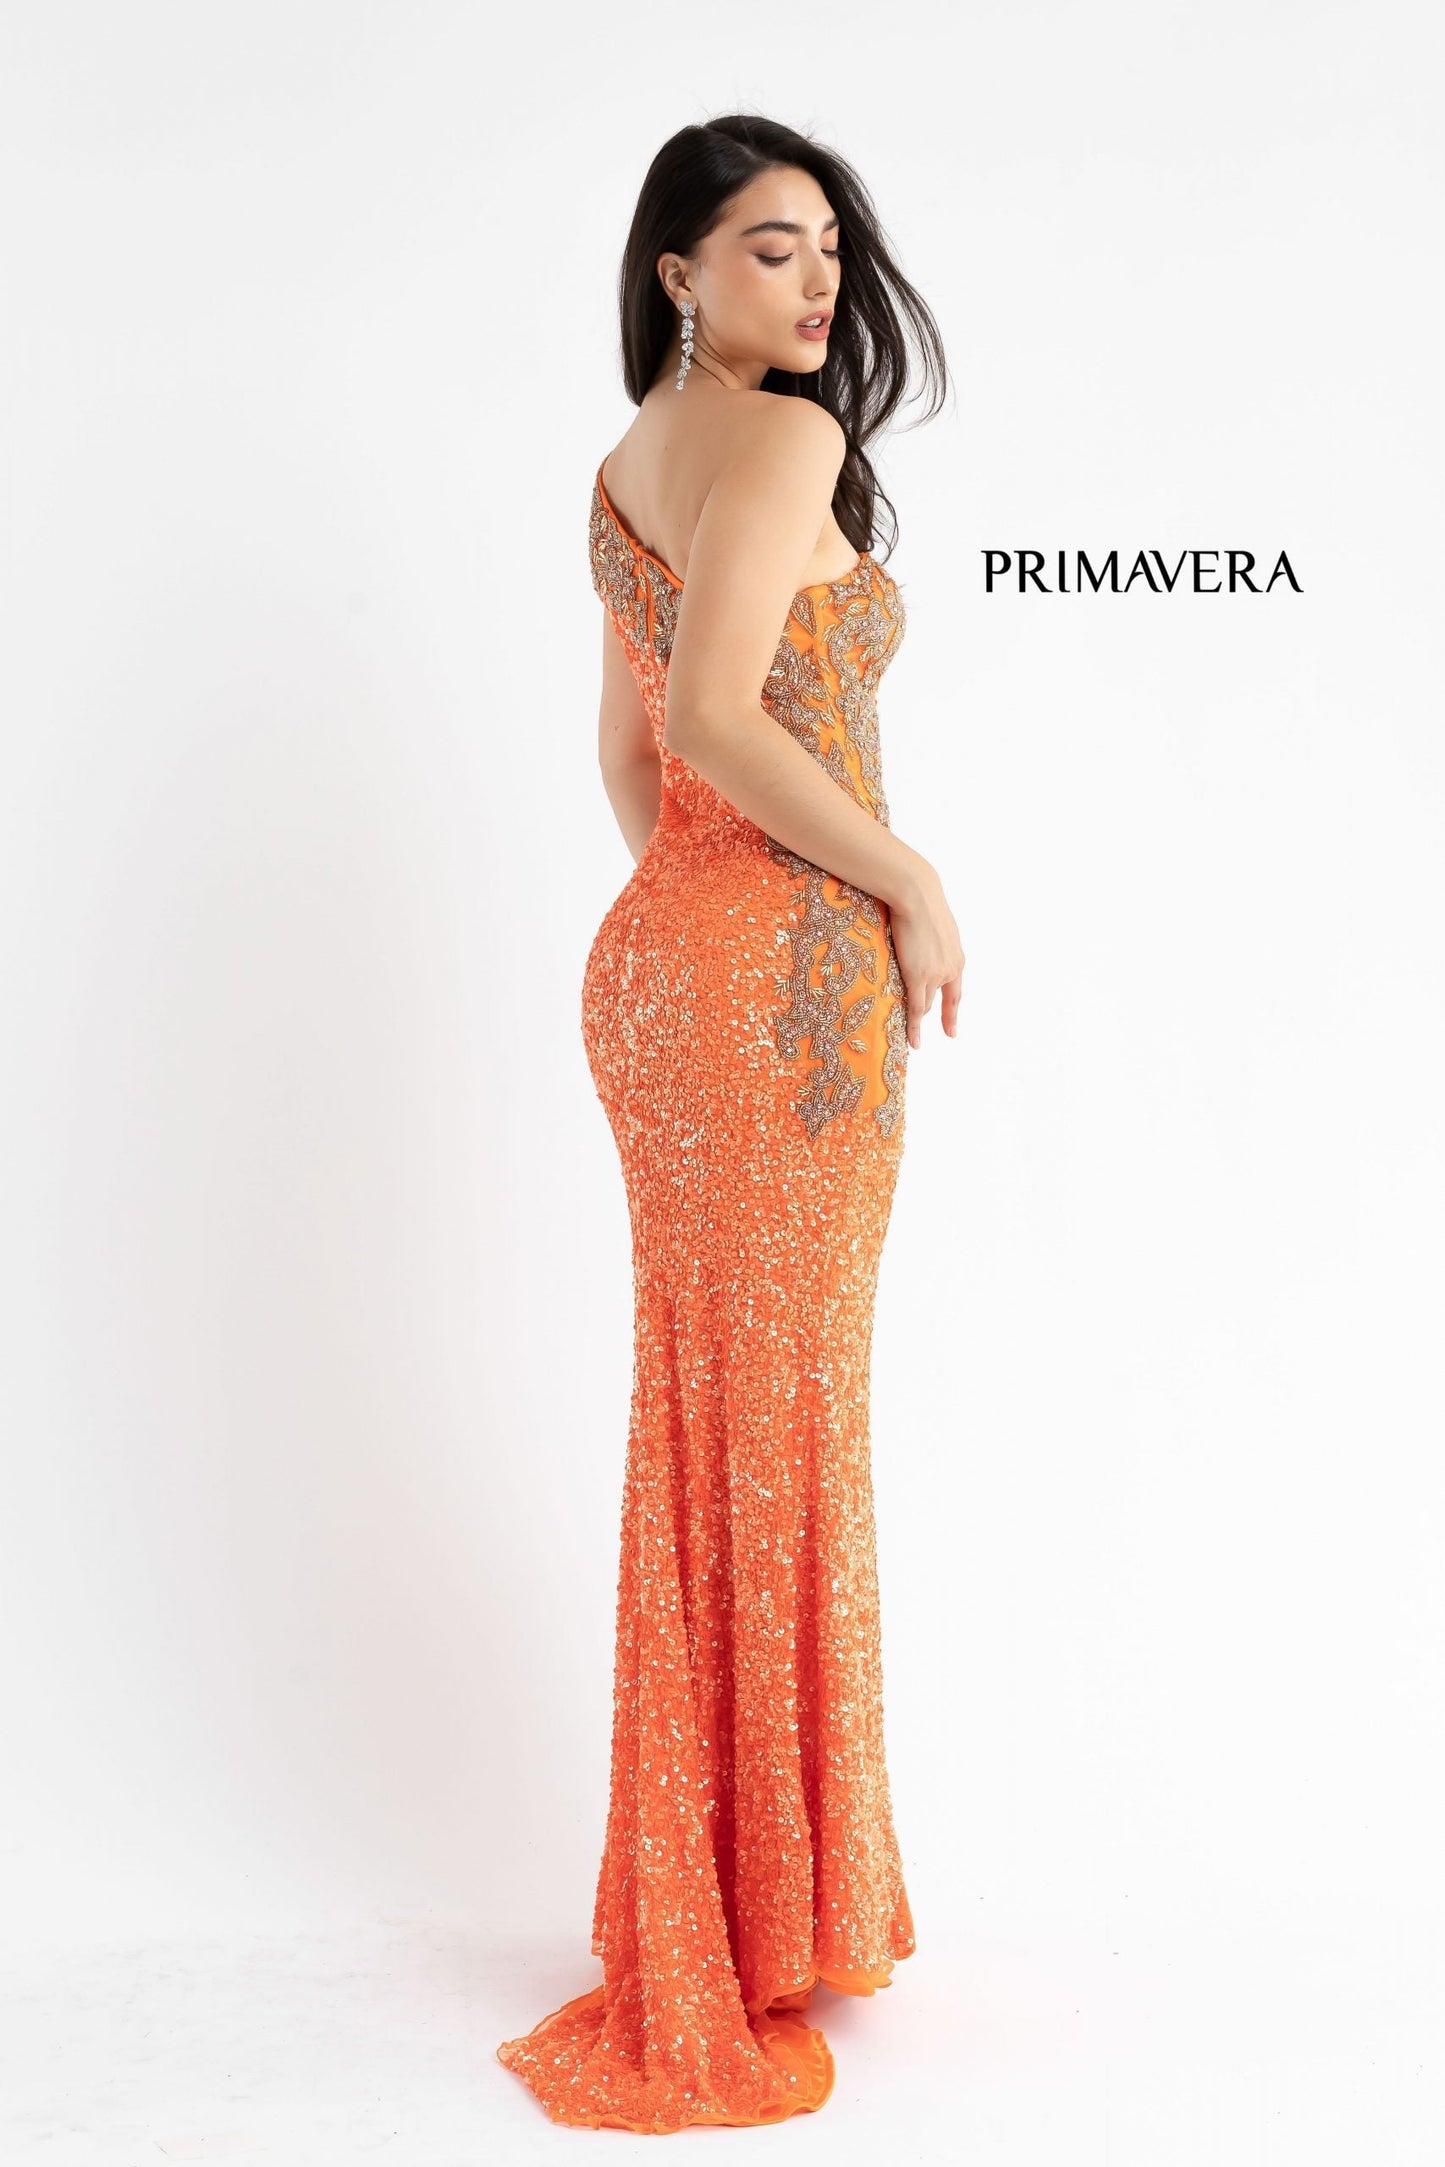 Primavera Couture 3637 is a stunning Long Fitted Sequin Embellished Formal Evening Gown. This One Shoulder Prom Dress Features Beaded Embellishments cascading from the one shoulder neckline down the side of the gown along the hip. Slit in skirt with a sweeping train. Great Pageant Formal Style.